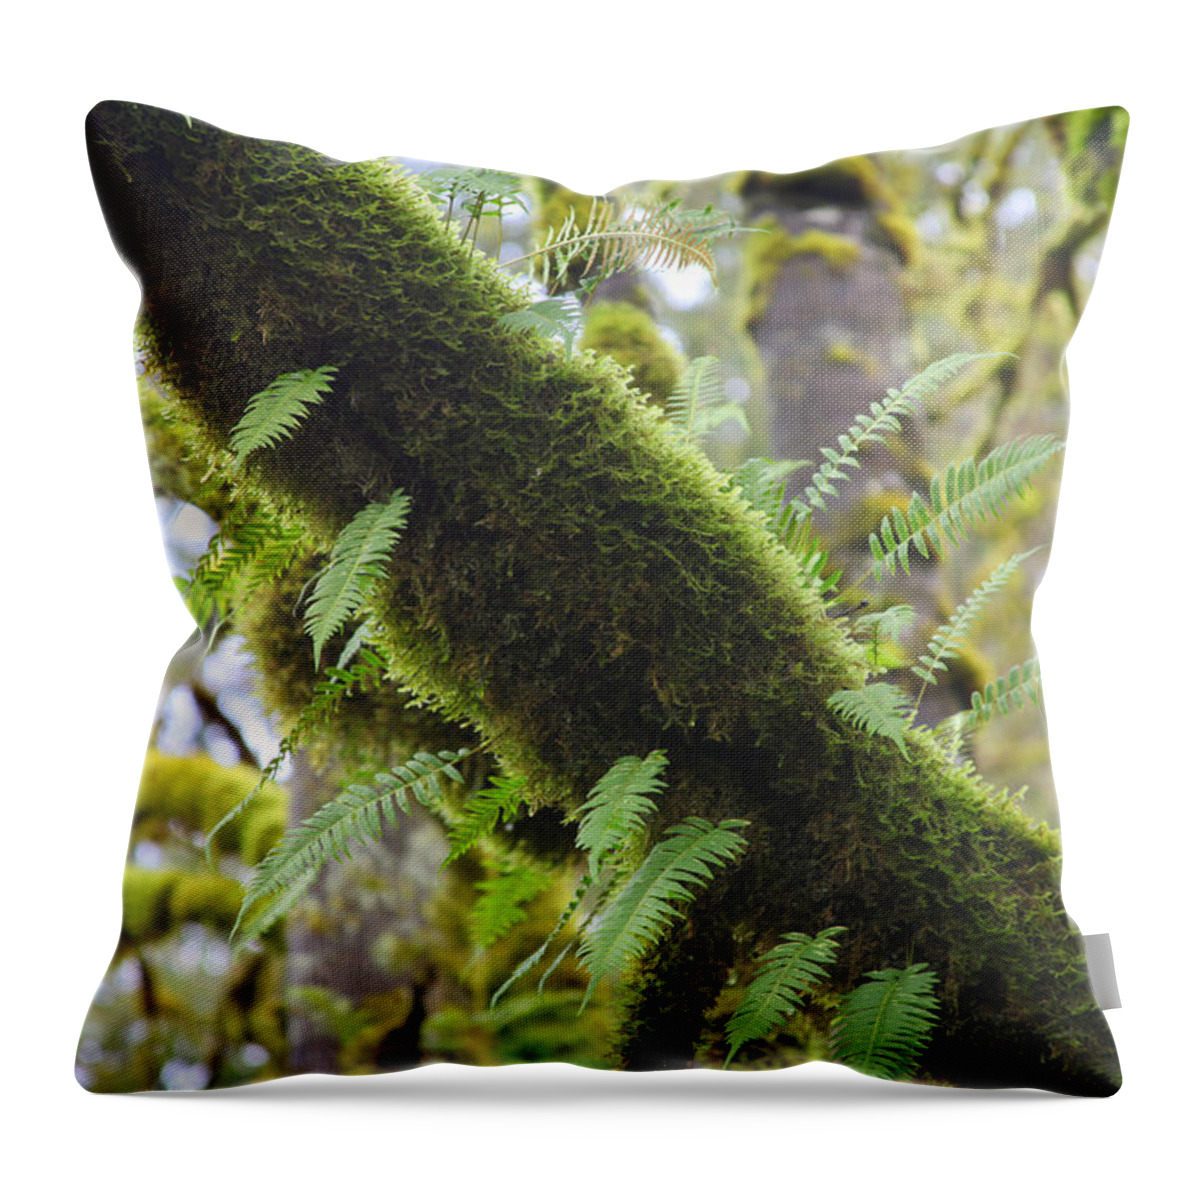 Moss Throw Pillow featuring the photograph Feathered Moss by Tammy Pool